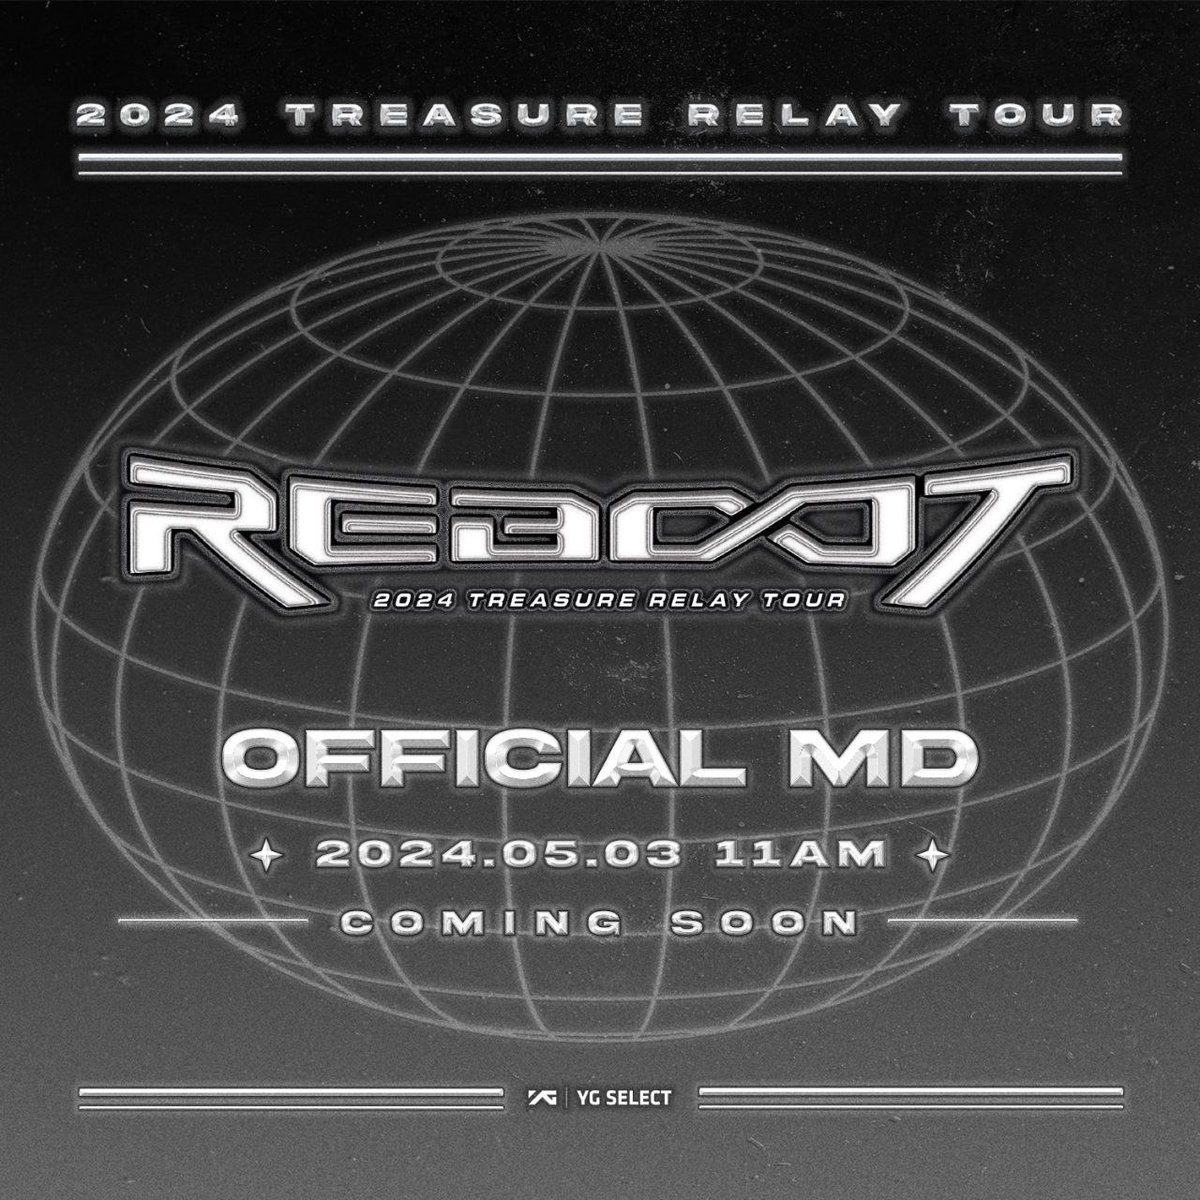 ️

️
—— Get ready for an exclusive treat! As we gear up for the much-anticipated Relay Tour 2024, YG Select is set to unveil a unique piece of merch that will symbolize the Reboot Relay Tour. Can you guess what this iconic item might be? Stay tuned and keep guessing!

️

️